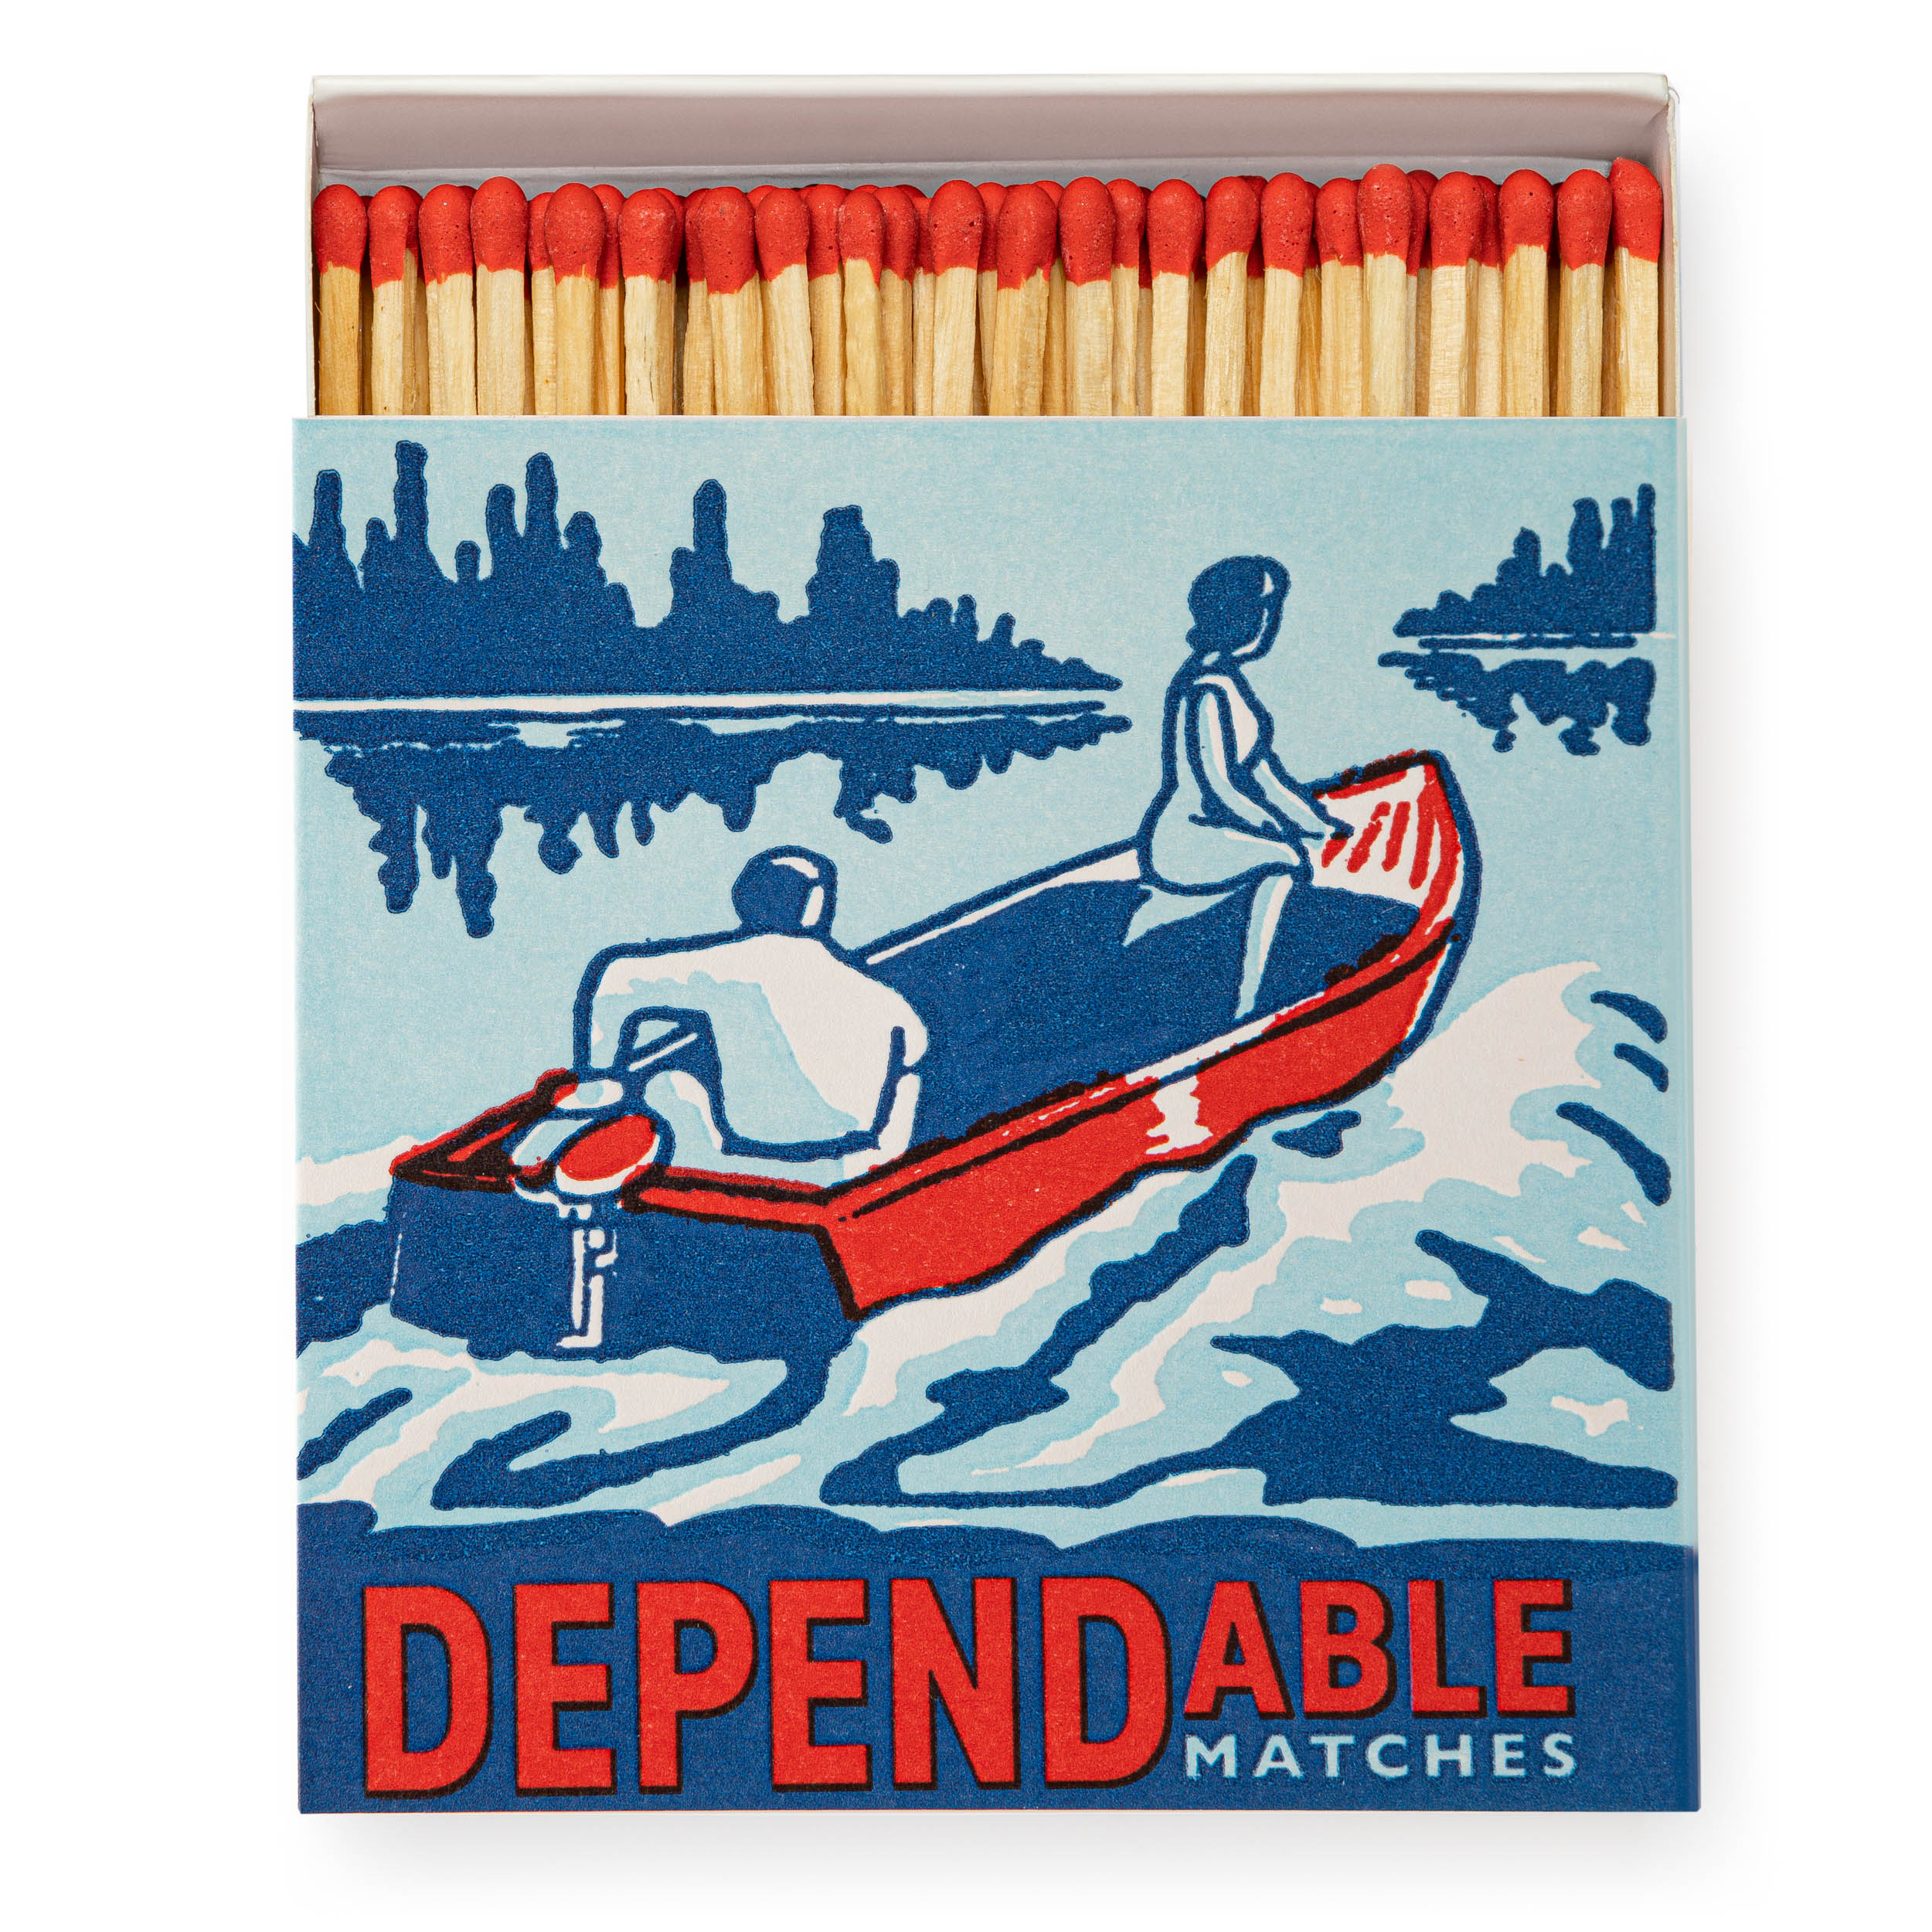 Dependable Matches - Square Matchboxes - Archivist - from Archivist Gallery 